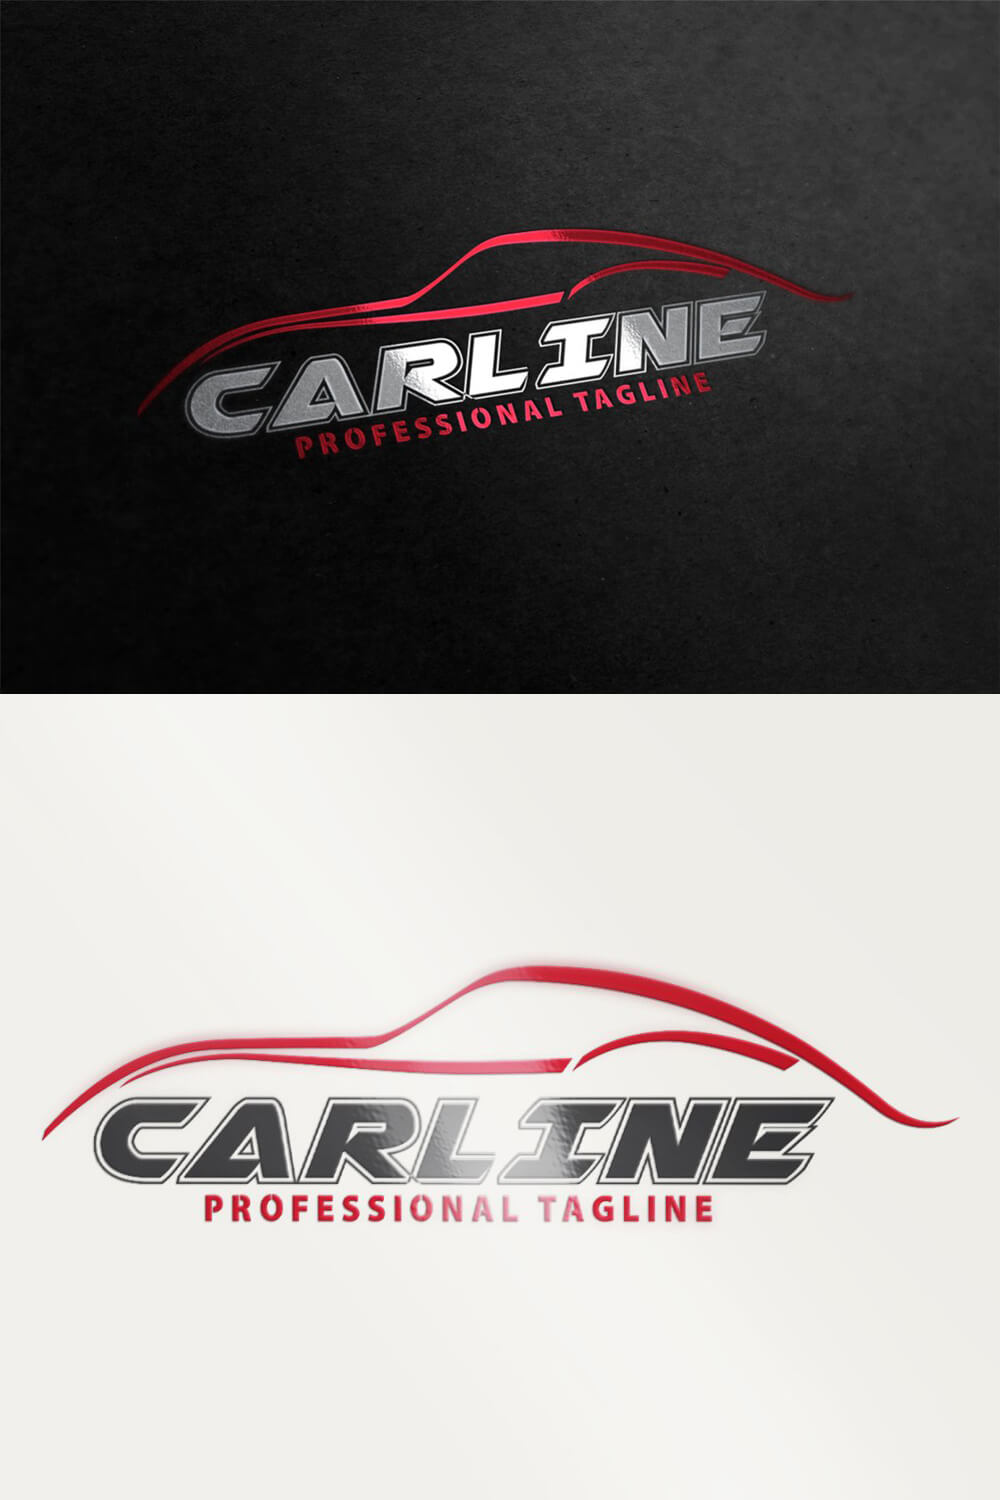 Two car line logos on black and white background.